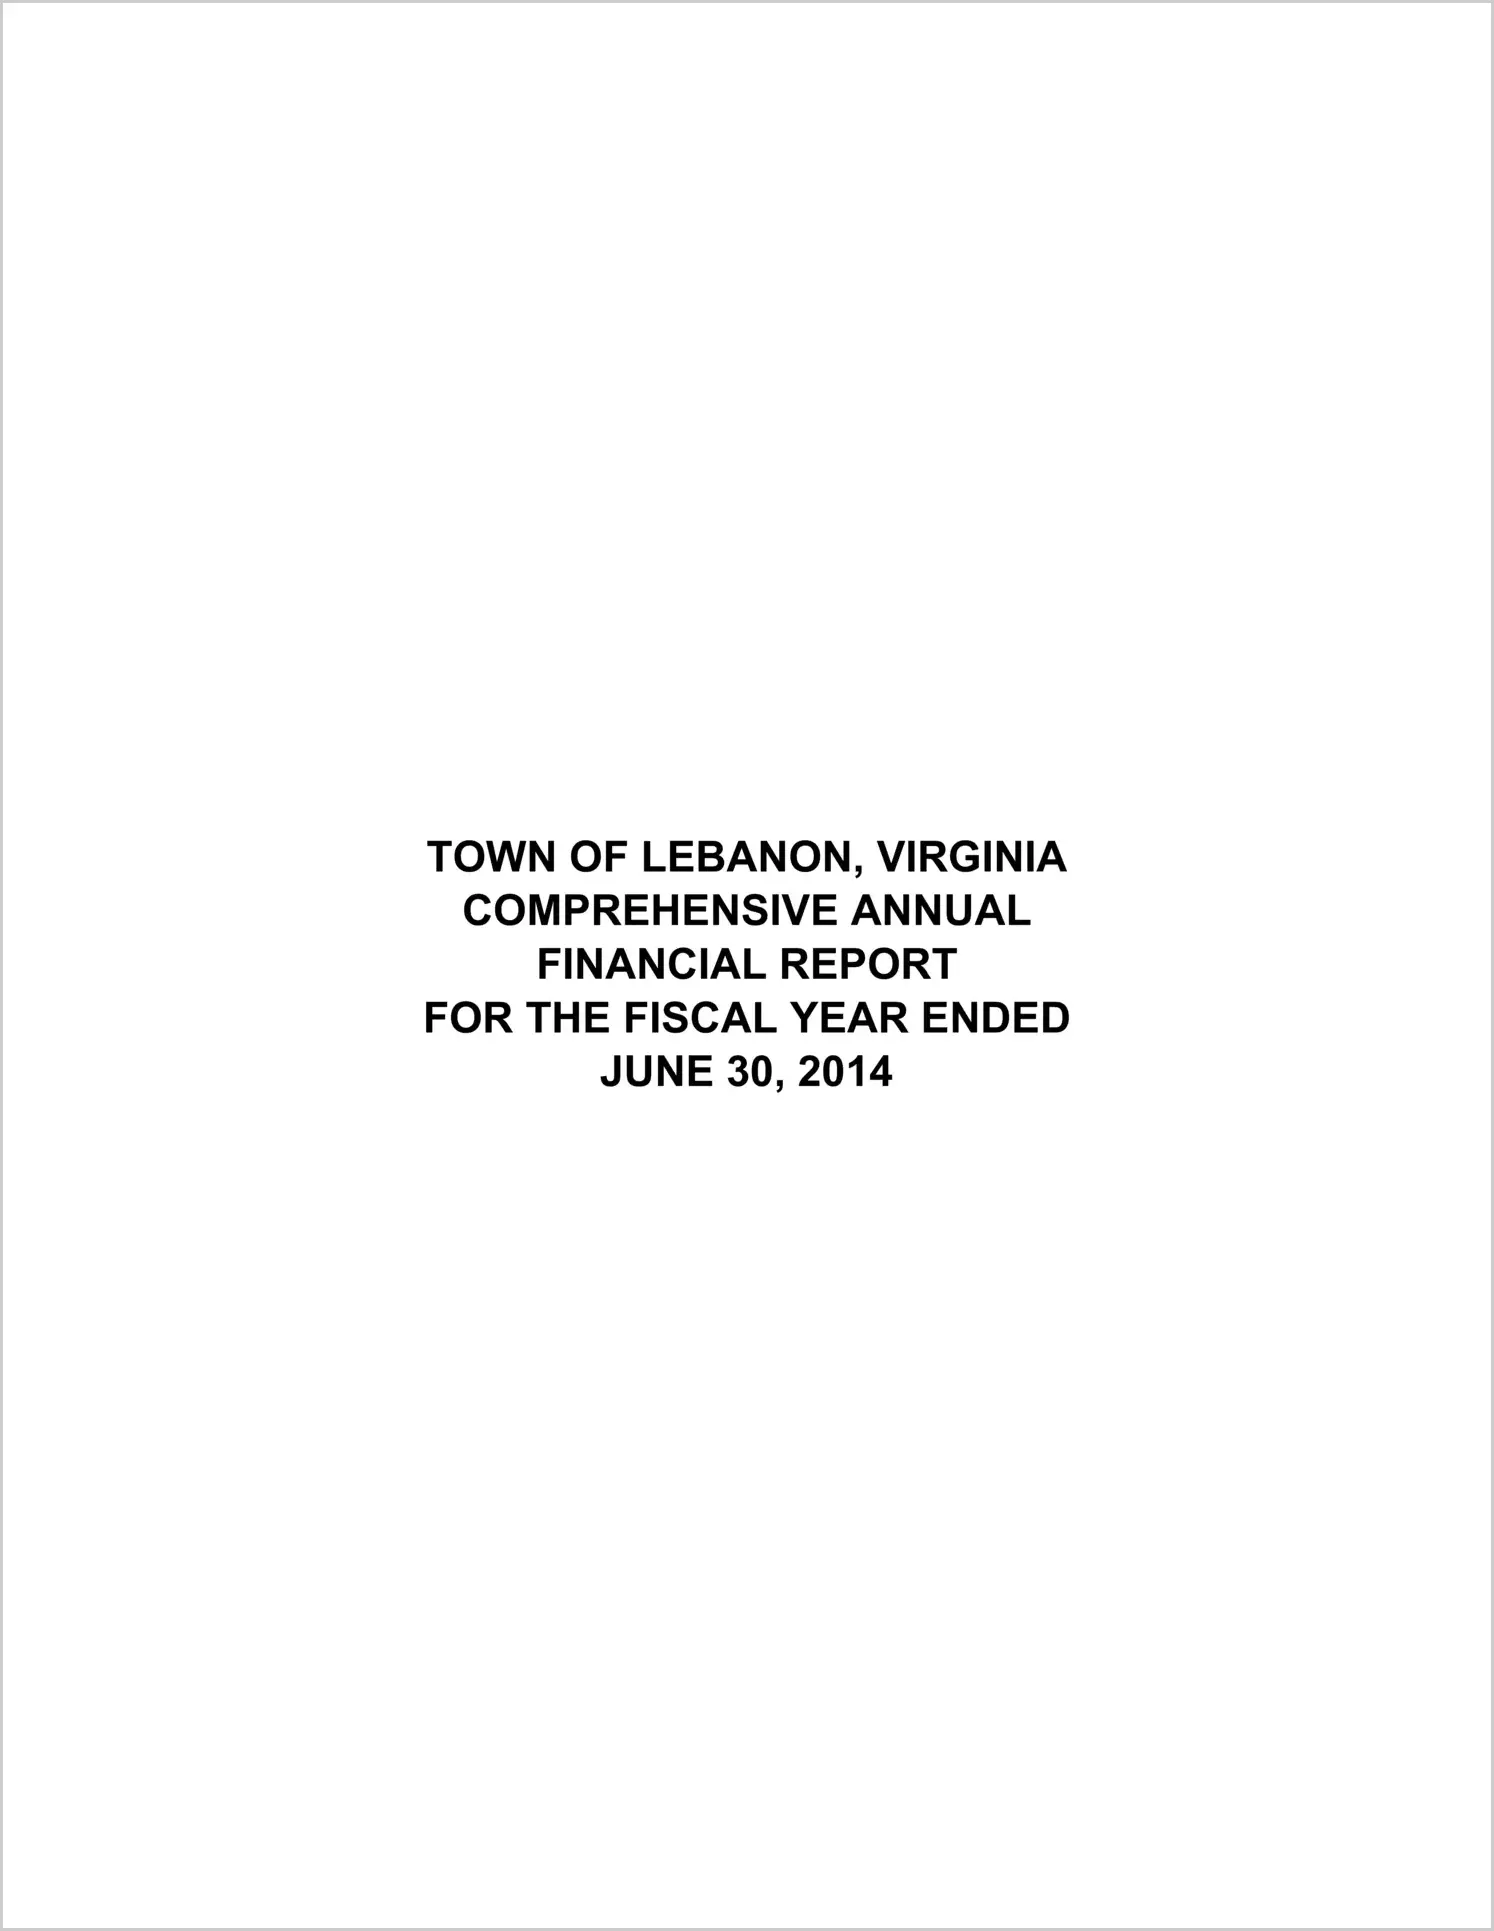 2014 Annual Financial Report for Town of Lebanon